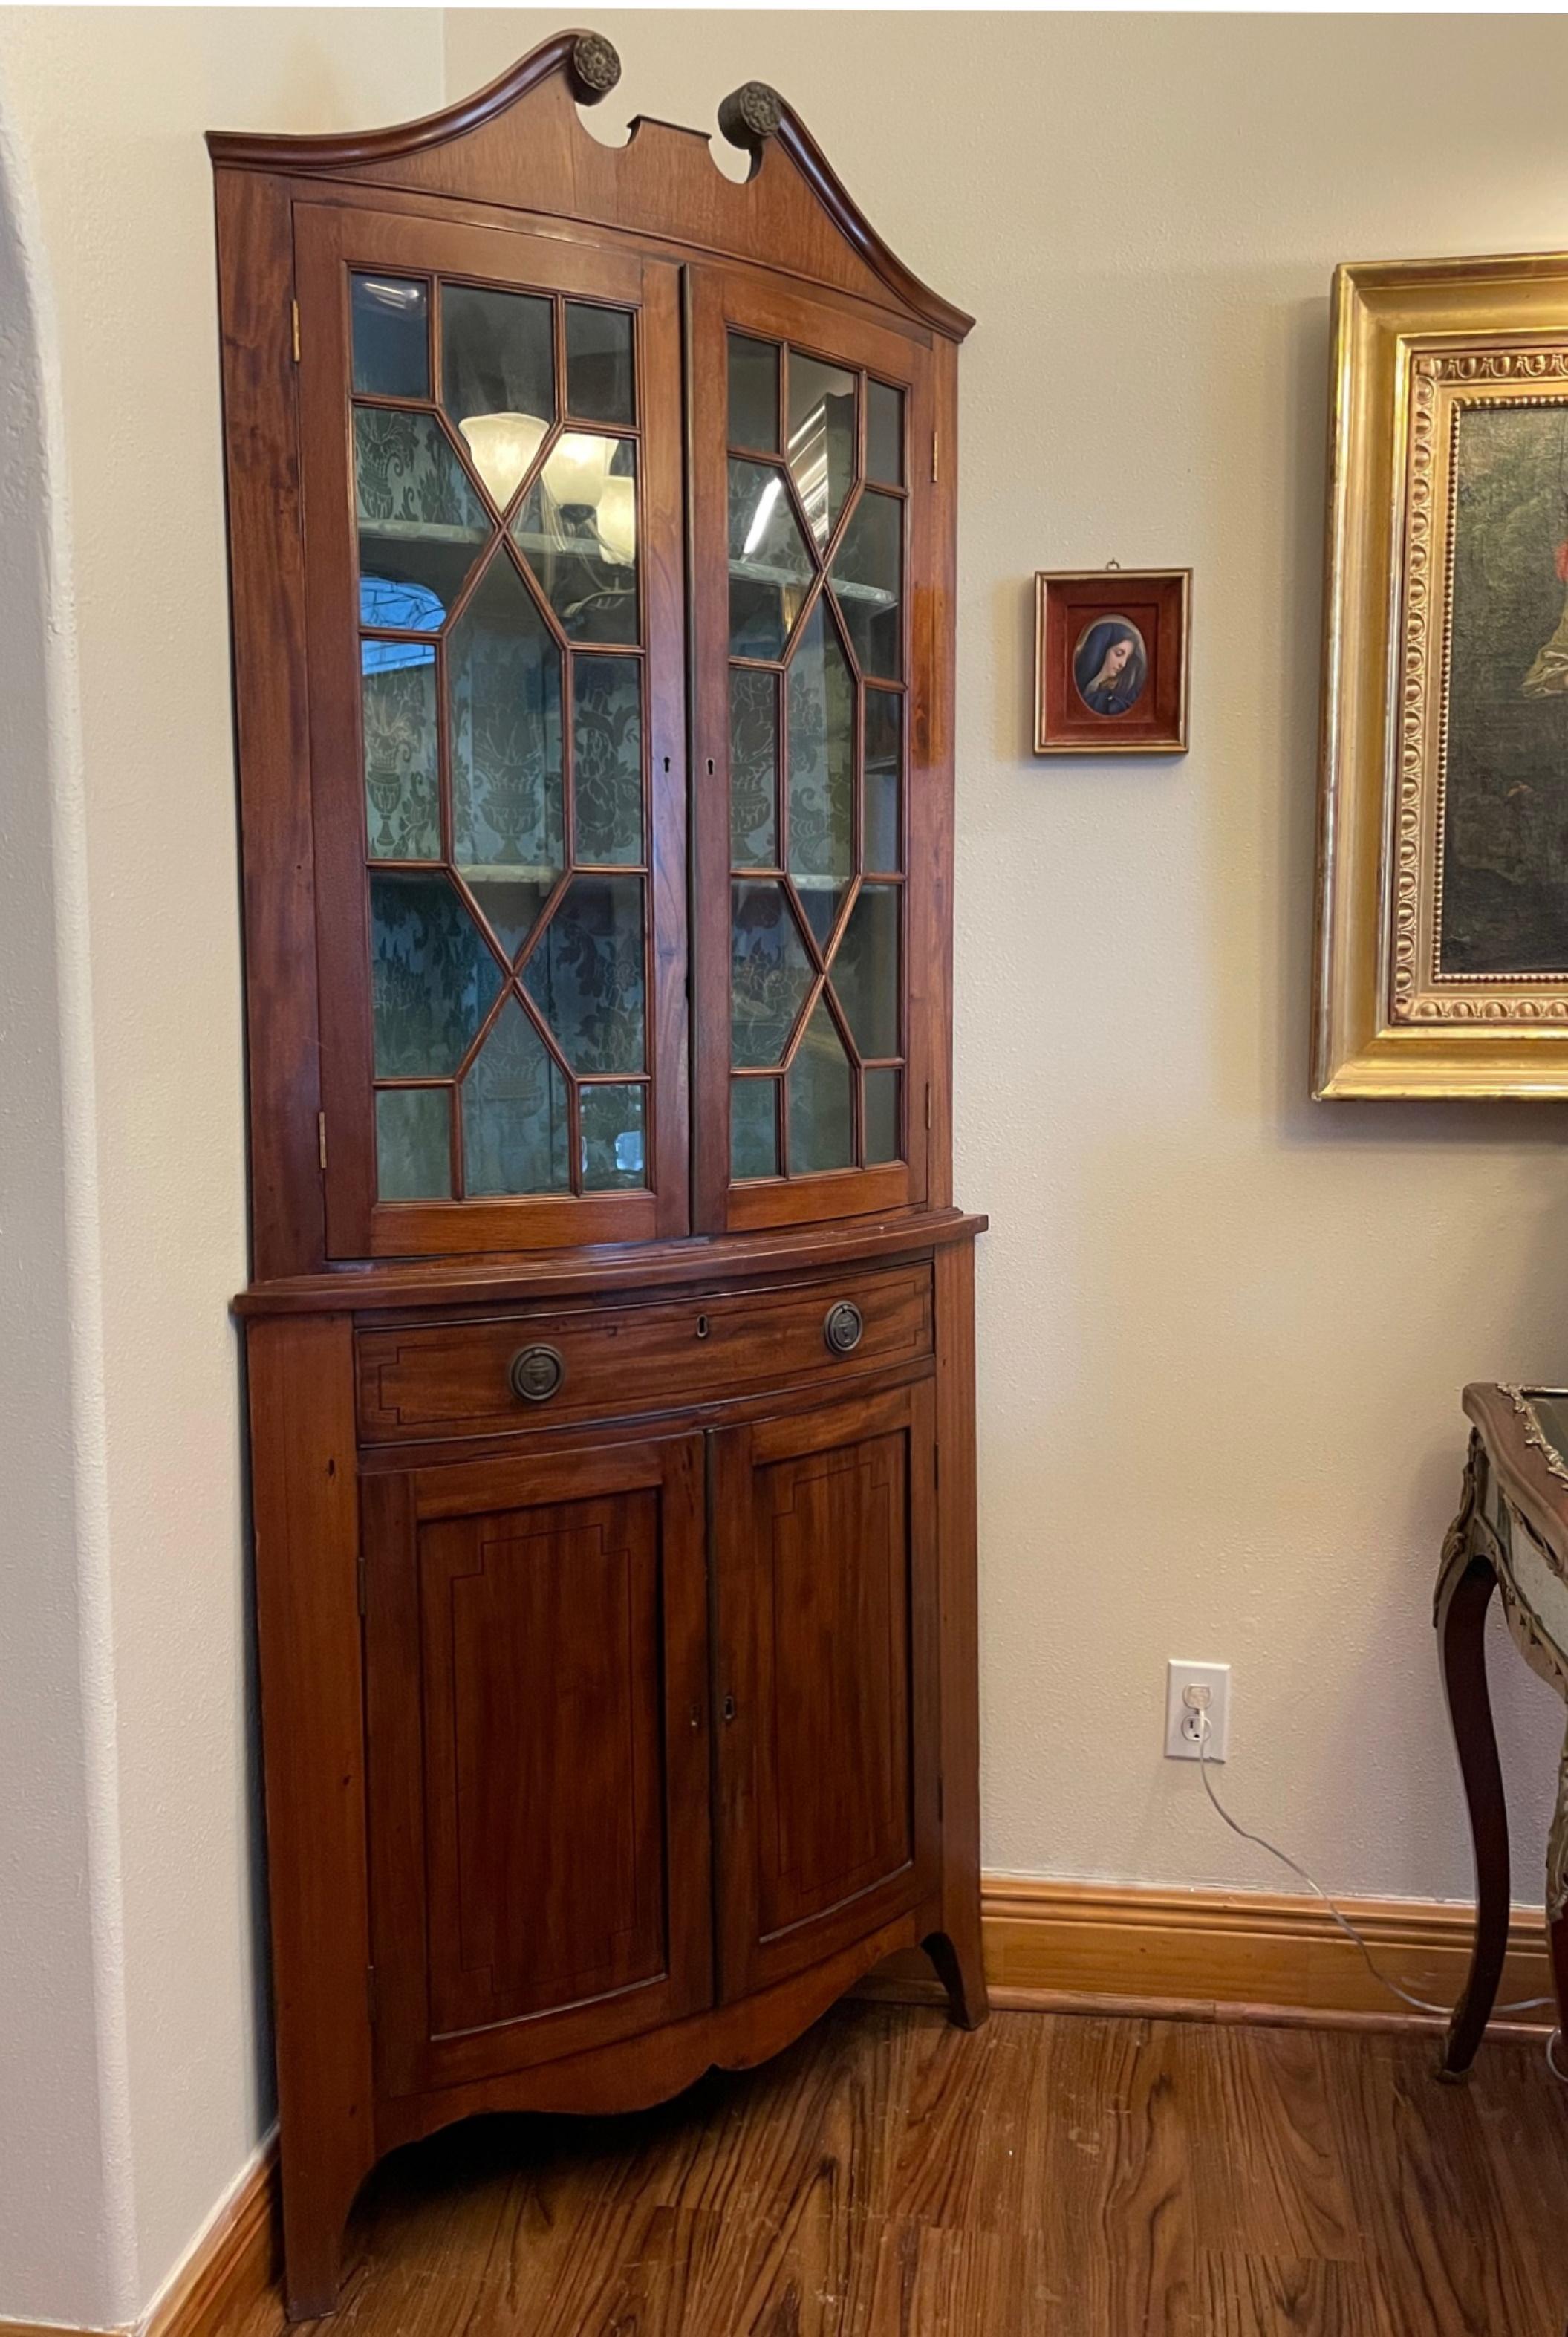 Edwardian mahogany corner cabinet.

This English mahogany cabinet is an elegant corner piece. The cupboard top is ornately glass paneled and the bottom cabinet is decoratively inlaid with satinwood. The cabinet stands on an apron with bracket feet.